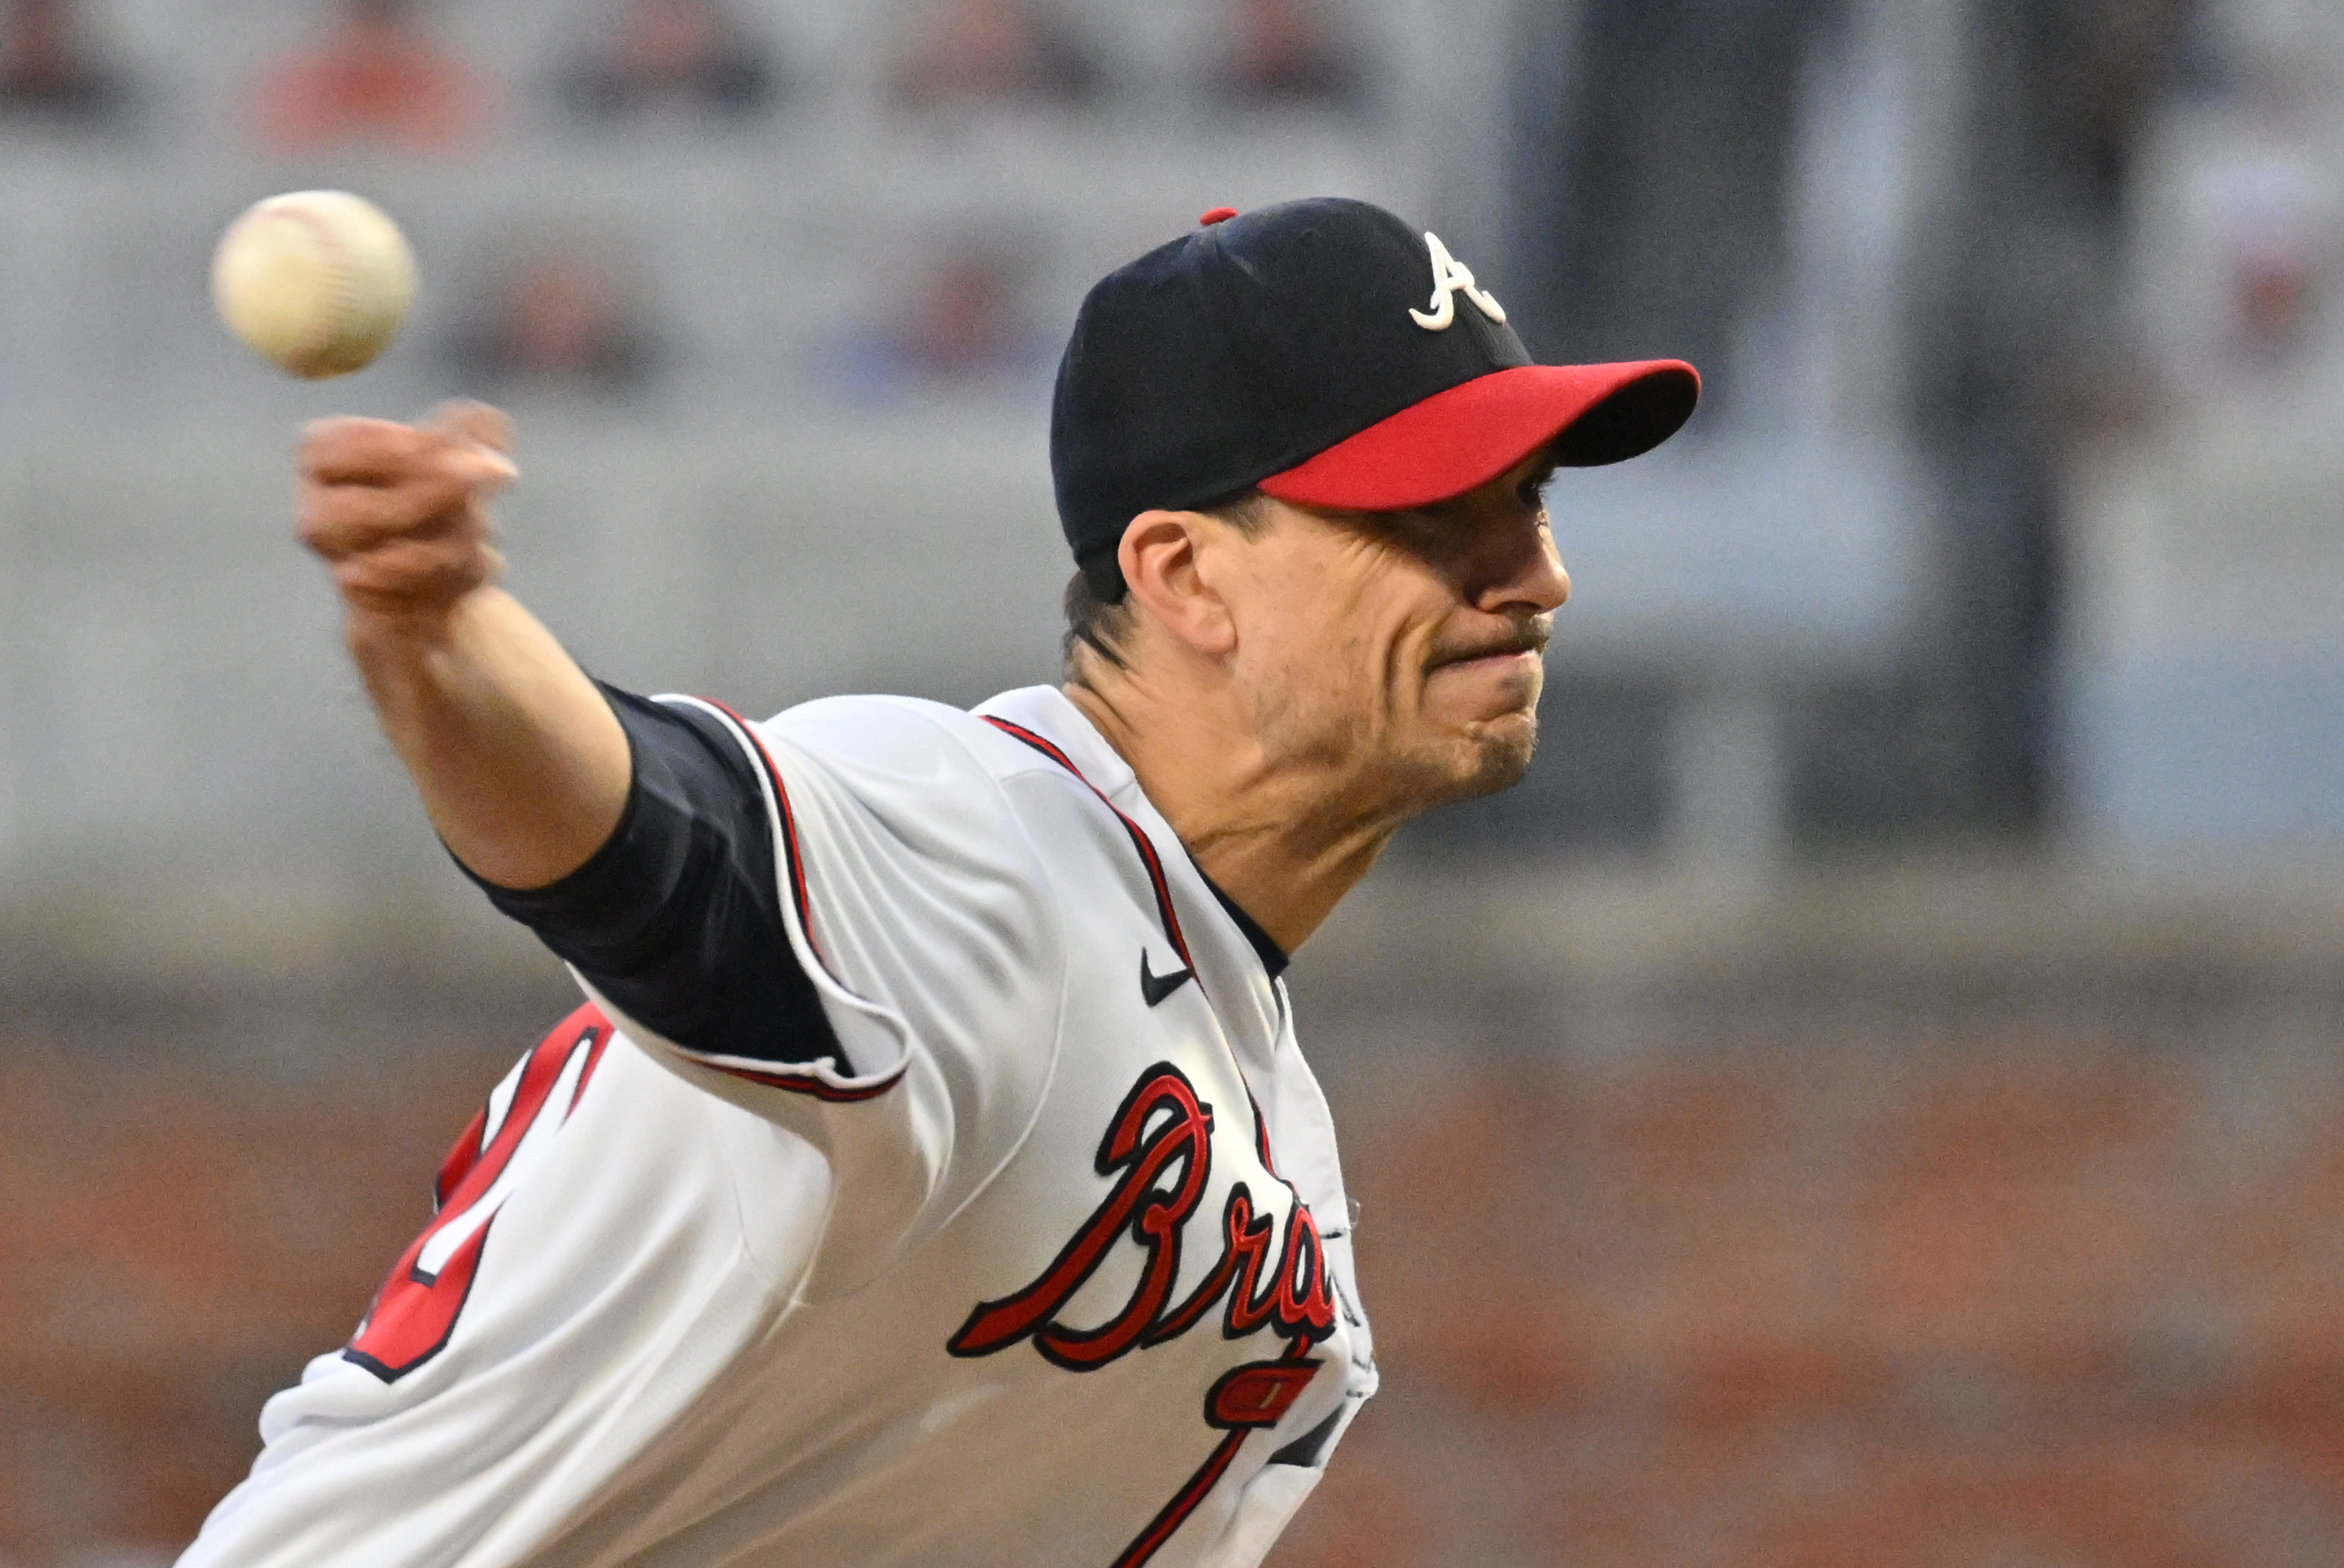 Braves News: Charlie Morton Placed on 15-Day IL, Ineligible for